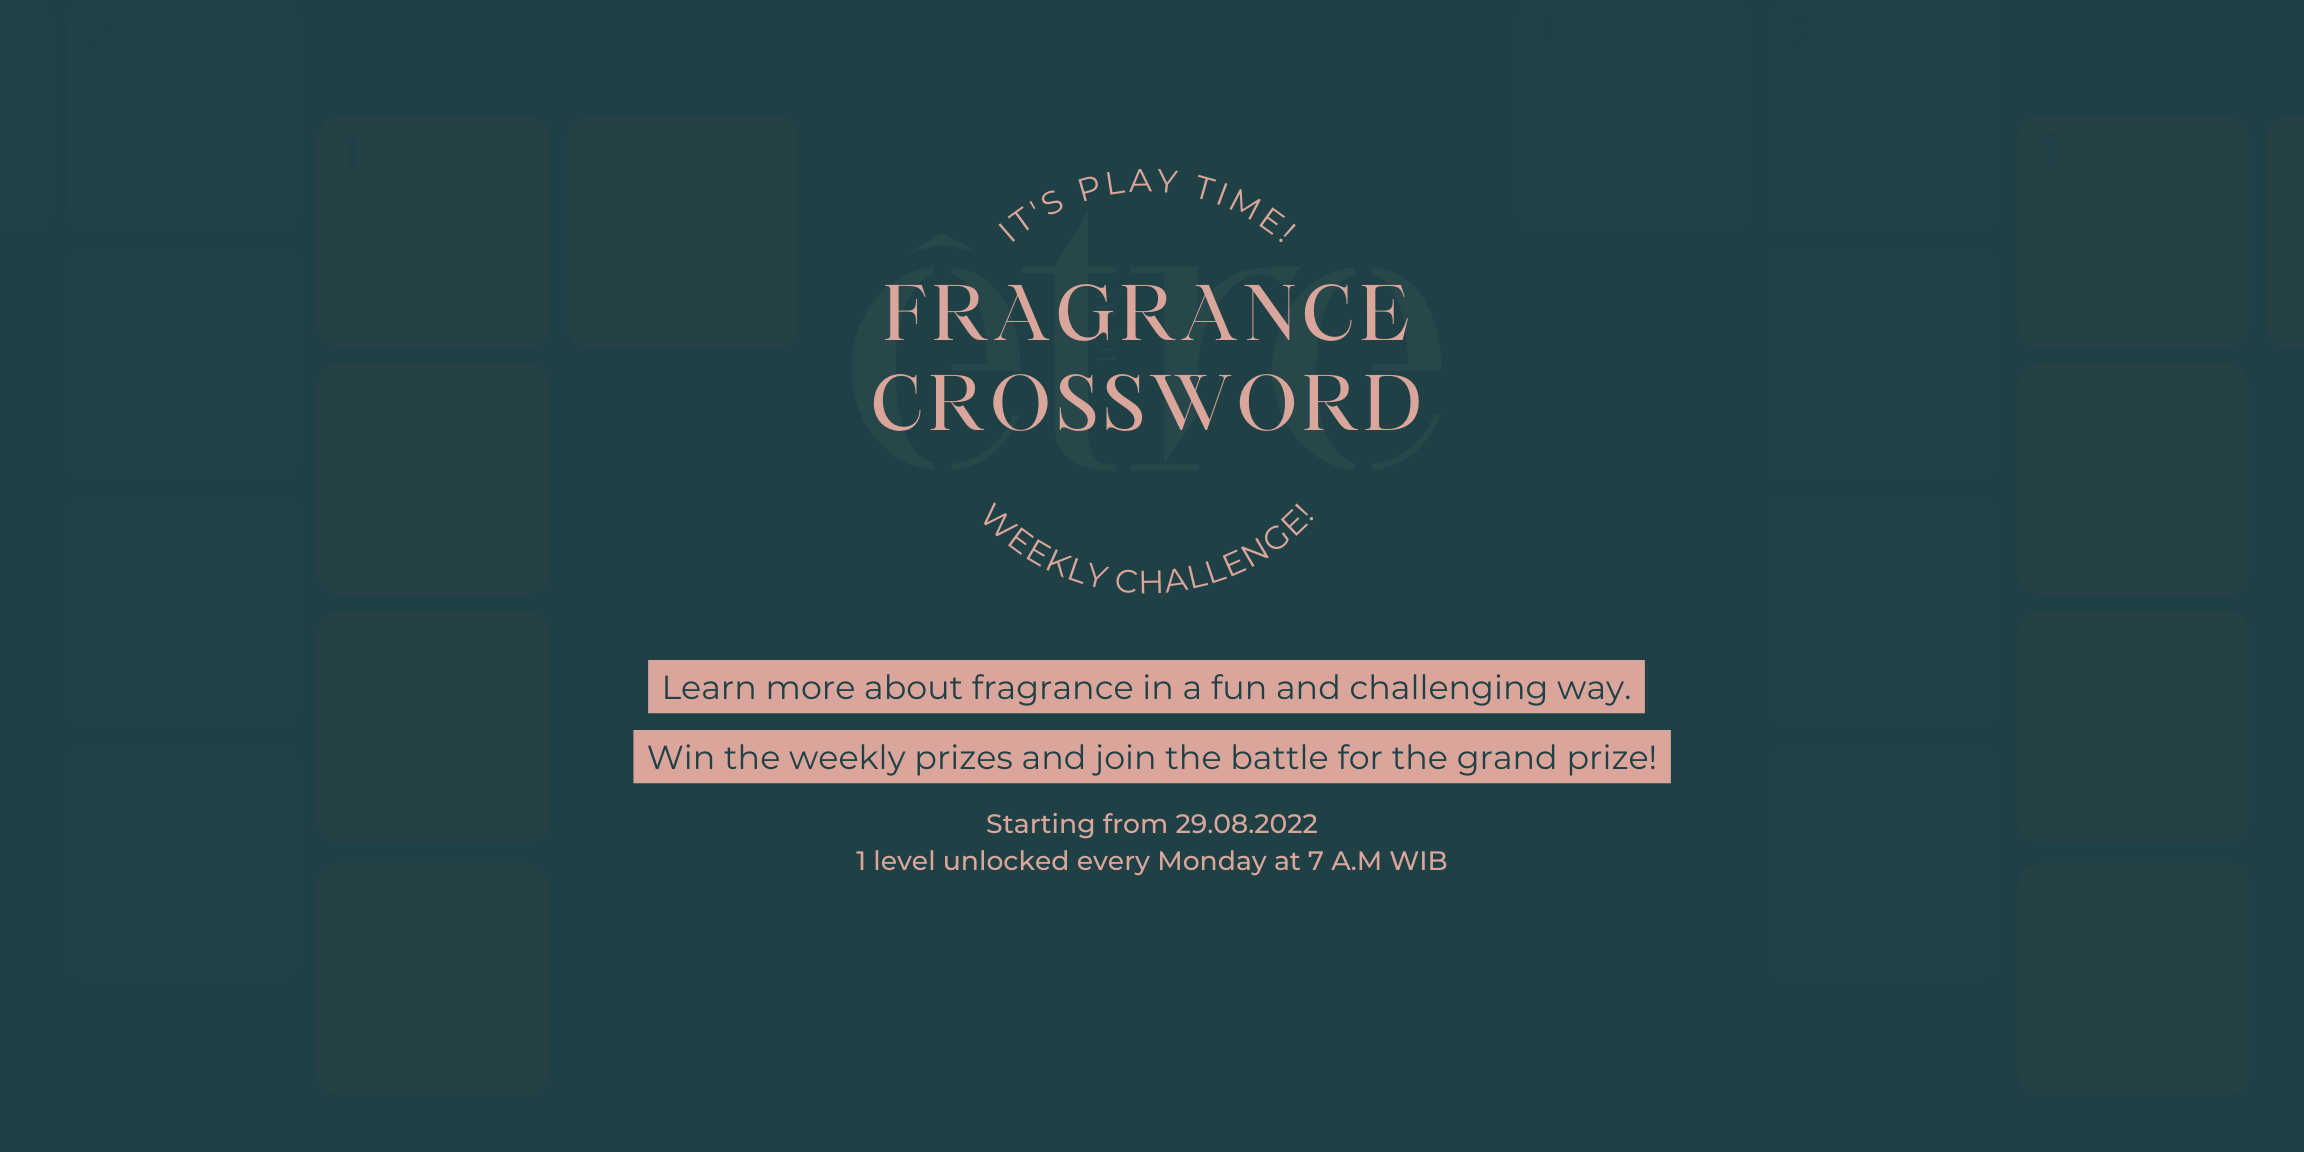 Fragrance Crossword, a five weeks journey of learning fragrance by pla